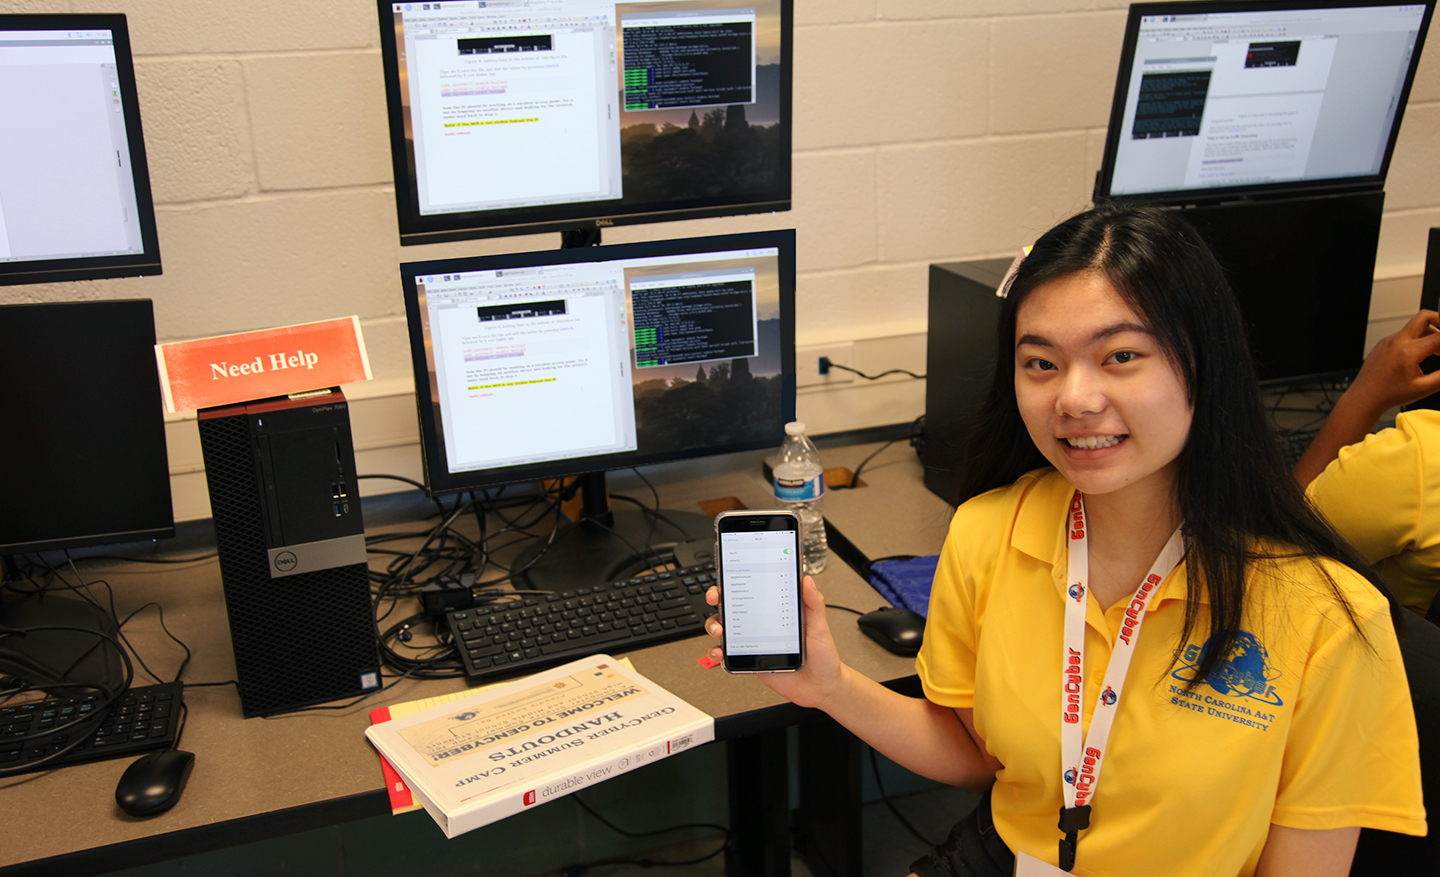 A young student shows off their app